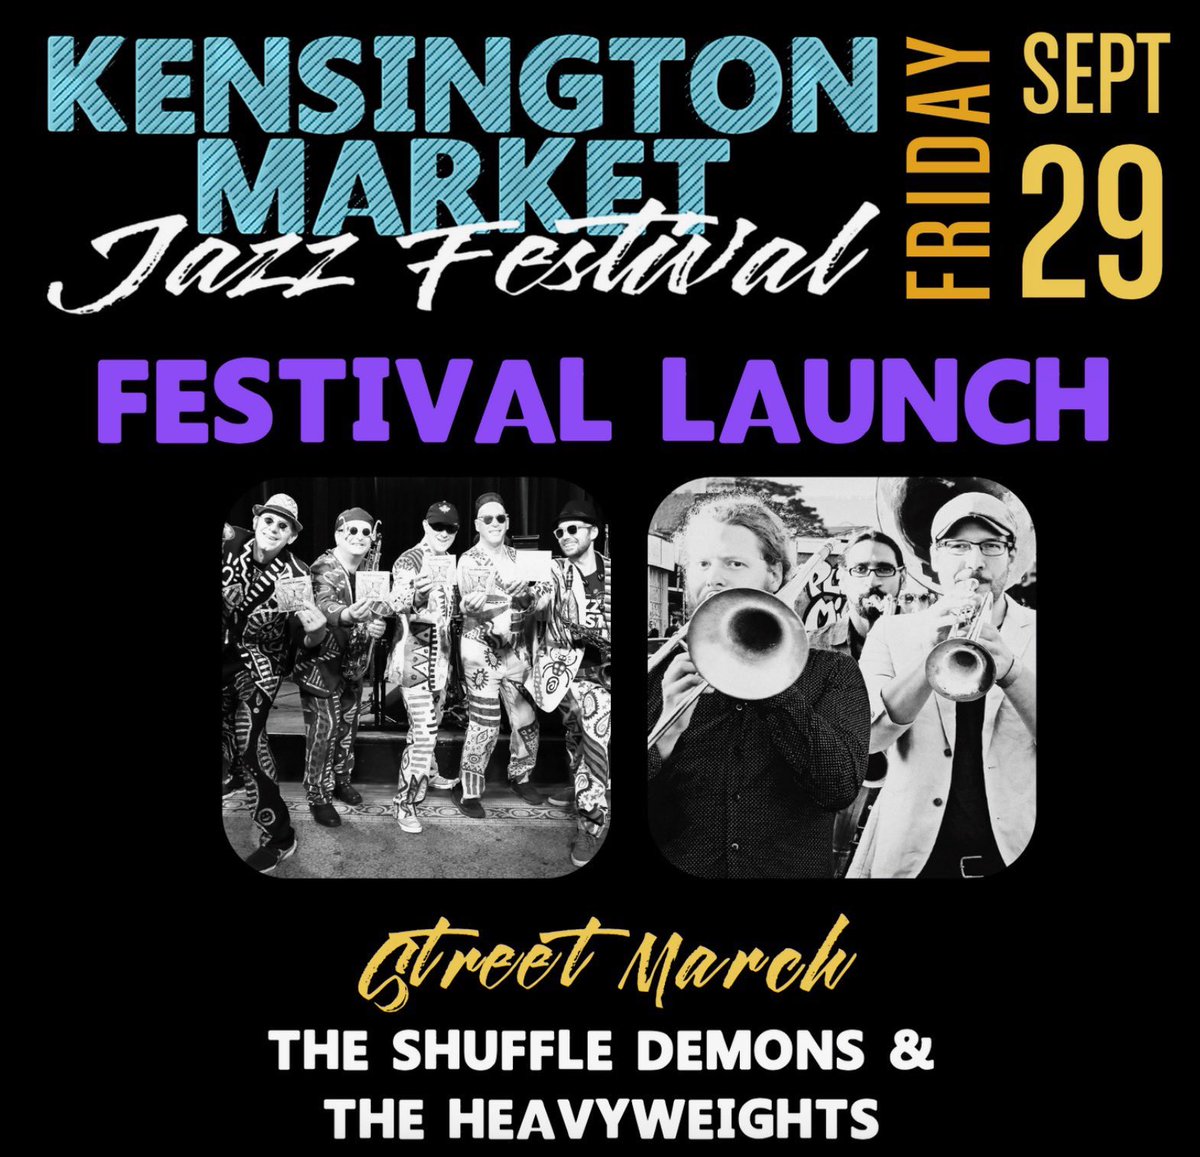 Today at 7pm it’s a fantastic street parade with @HeavyweightsBB and @ShuffleDemons to kick off the @kensingtonjazz See you there and at venues in the market all weekend for outstanding local jazz!